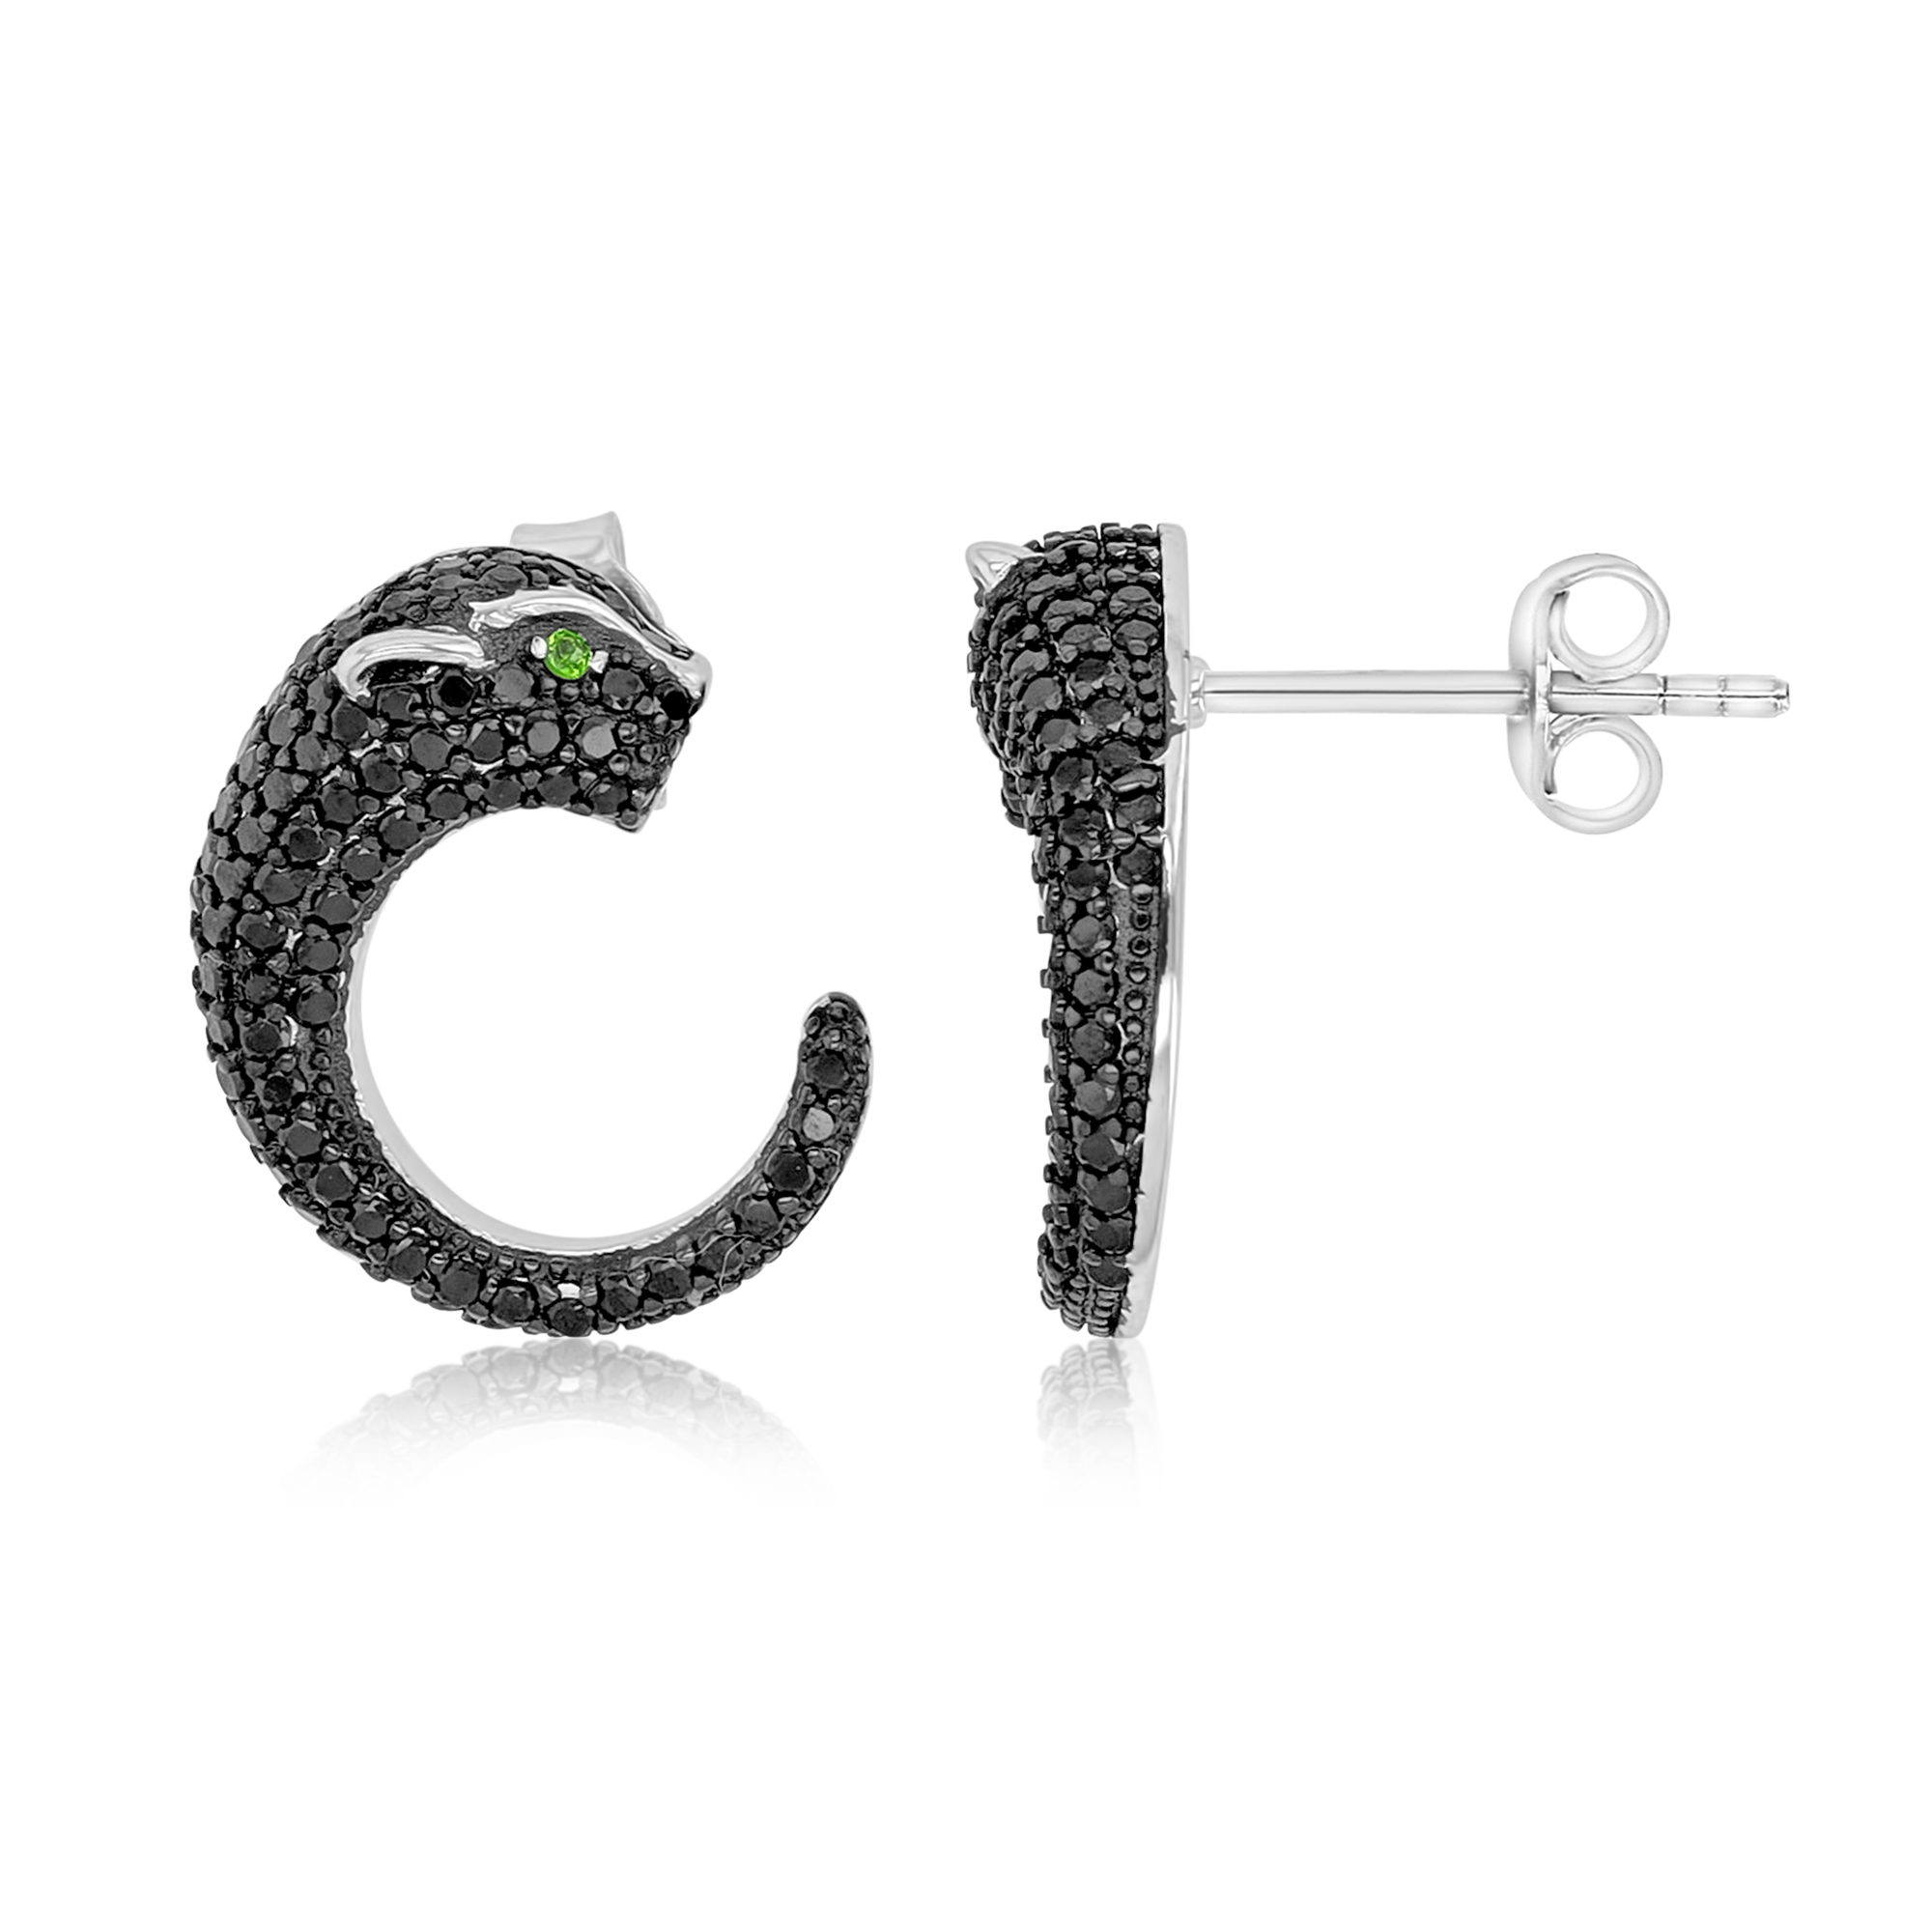 Sterling Silver Two-Tone Rnd Black Spinel Leopard with Chrome Diopside Eyes Stud Earrings 